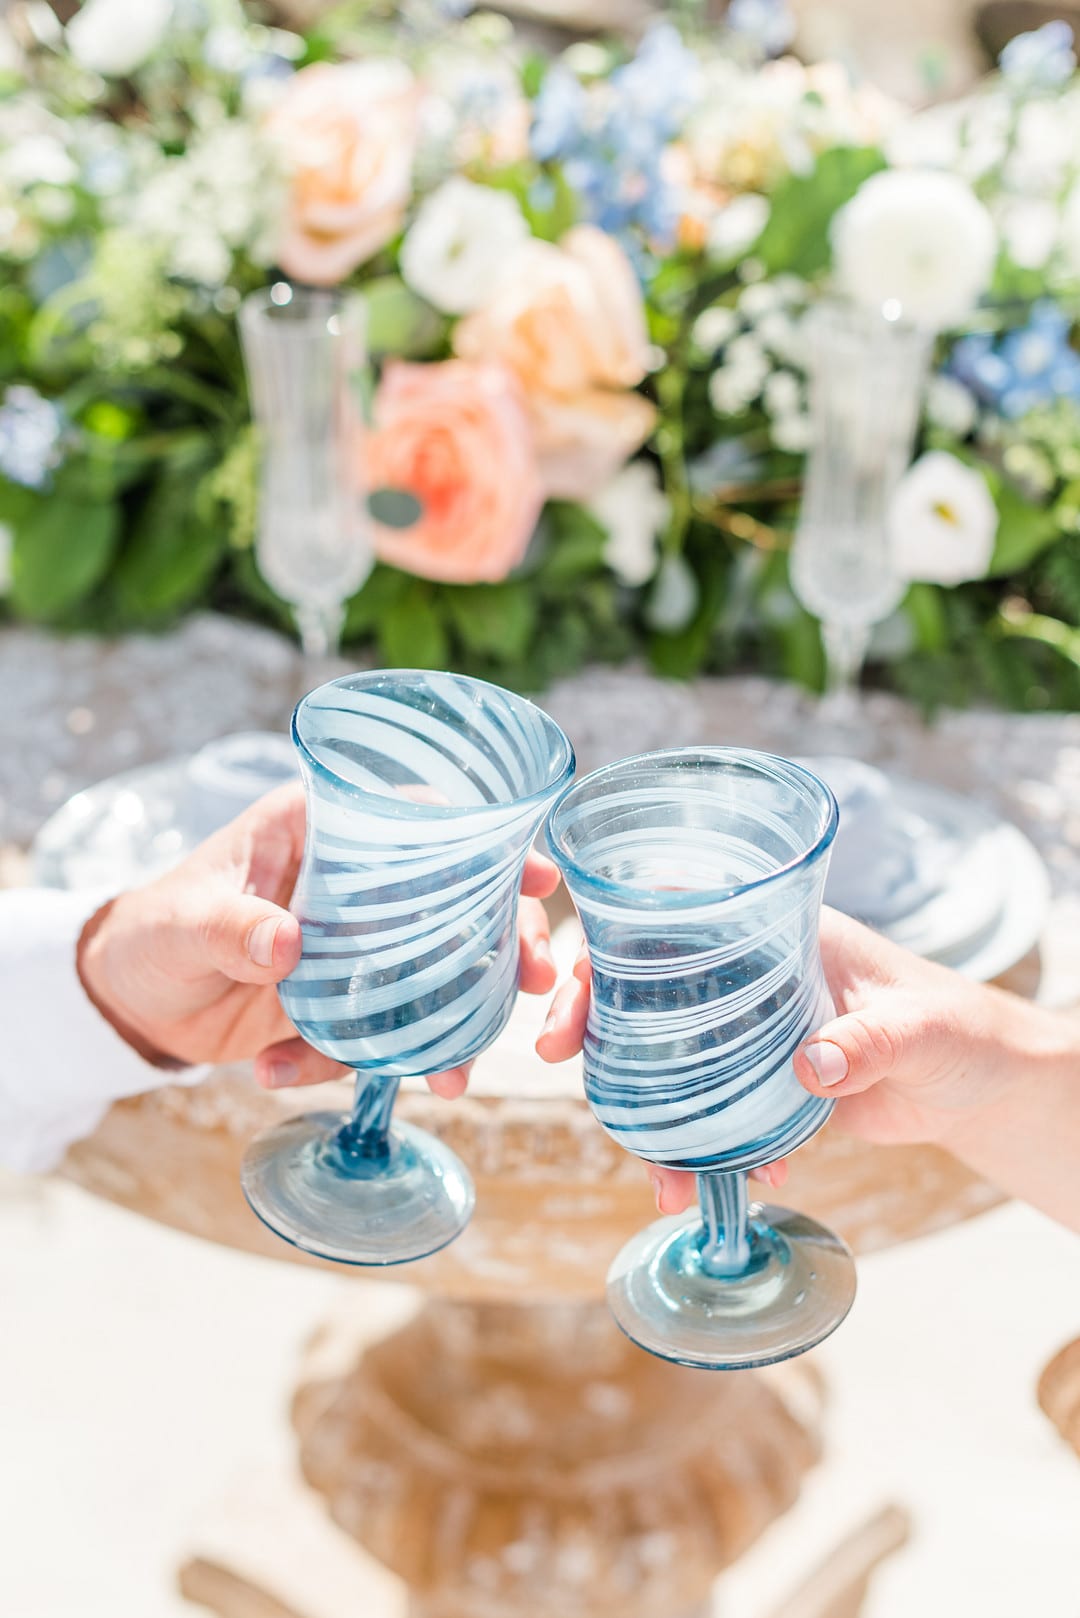 _Romantic, Spring Styled Wedding with Horses on the Beach_Christine Austin Photography_©christineaustinphotography_2021_RomanticBeachStyledShoot_Austin+Naomi_10_low